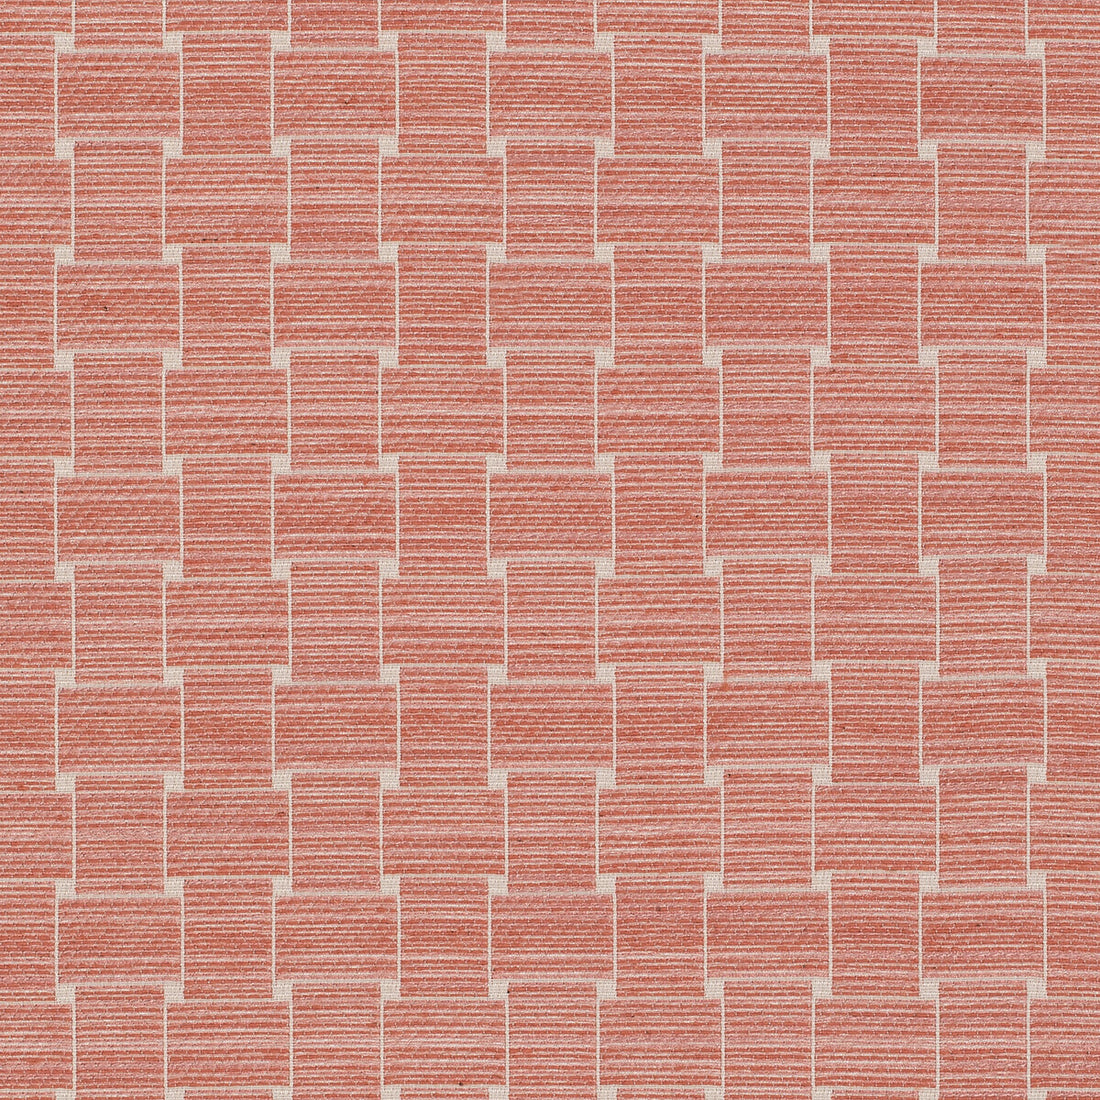 Beaumois Woven fabric in petal color - pattern 8020108.7.0 - by Brunschwig &amp; Fils in the Granville Weaves collection